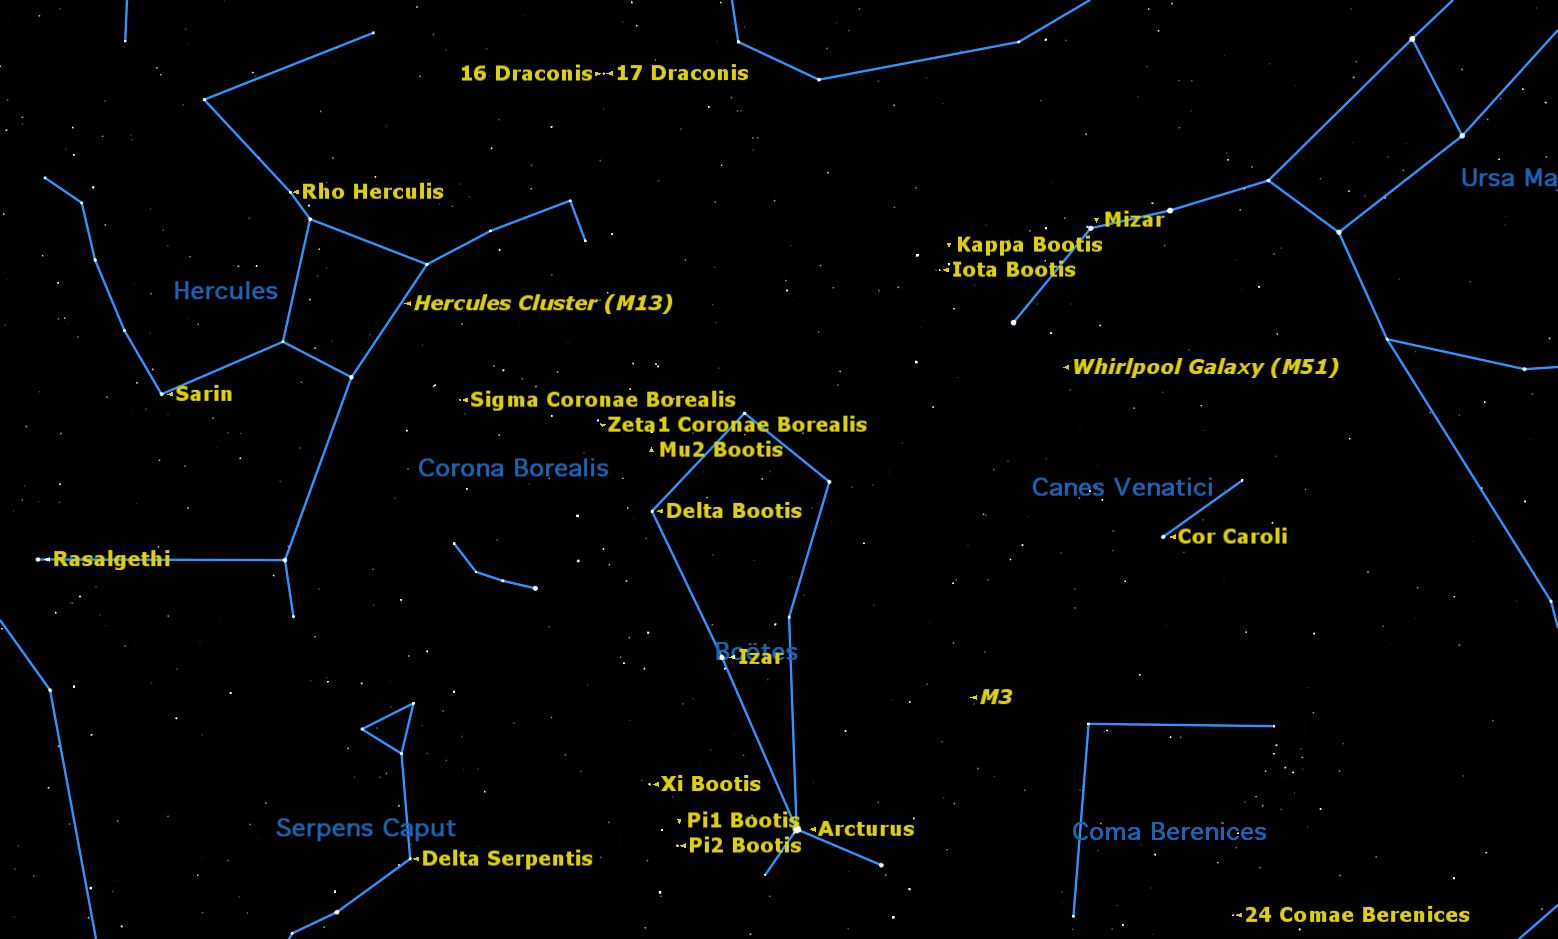 The curve of the Big Dipper’s handle leads to Arcturus, the brightest star in the kite-shaped constellation of Boötes. Surrounding Boötes is an amazing variety of double stars. Credit: Starry Night software.